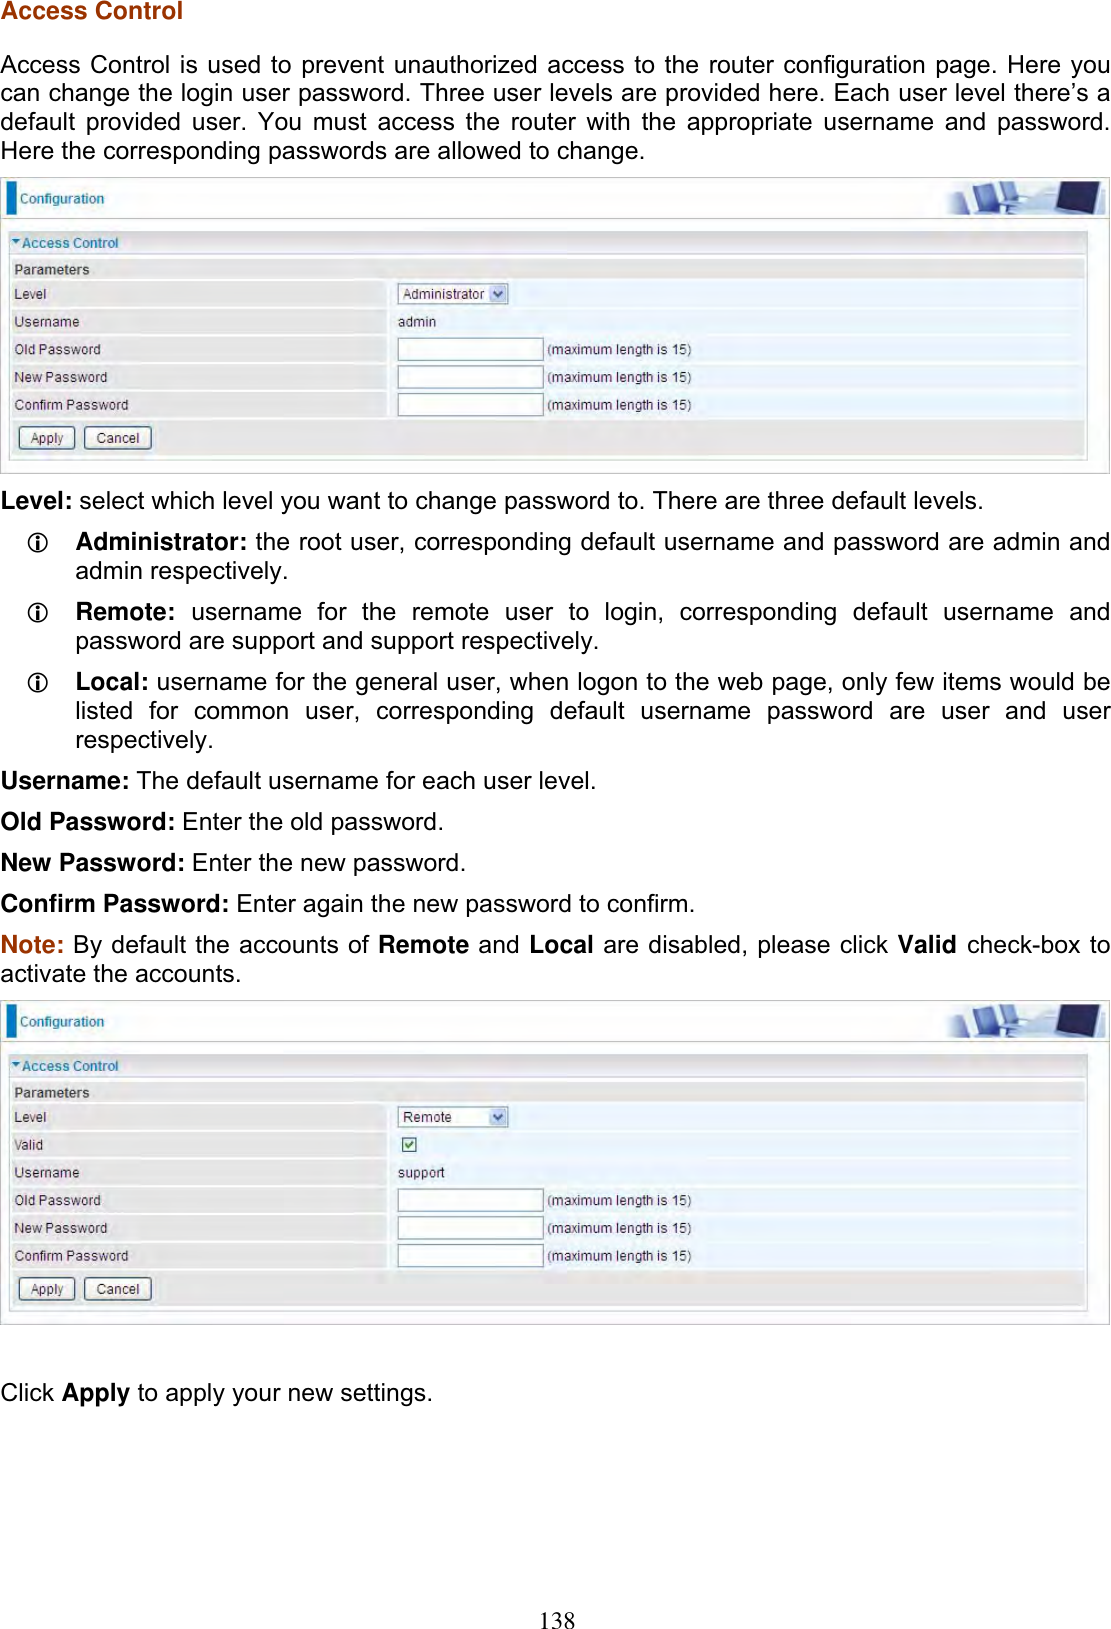 138Access Control Access Control is used to prevent unauthorized access to the router configuration page. Here you can change the login user password. Three user levels are provided here. Each user level there’s a default provided user. You must access the router with the appropriate username and password. Here the corresponding passwords are allowed to change.  Level: select which level you want to change password to. There are three default levels. LAdministrator: the root user, corresponding default username and password are admin and admin respectively. LRemote: username for the remote user to login, corresponding default username and password are support and support respectively.  LLocal: username for the general user, when logon to the web page, only few items would be listed for common user, corresponding default username password are user and user respectively.Username: The default username for each user level. Old Password: Enter the old password. New Password: Enter the new password. Confirm Password: Enter again the new password to confirm.Note: By default the accounts of Remote and Local are disabled, please click Valid check-box to activate the accounts. Click Apply to apply your new settings. 